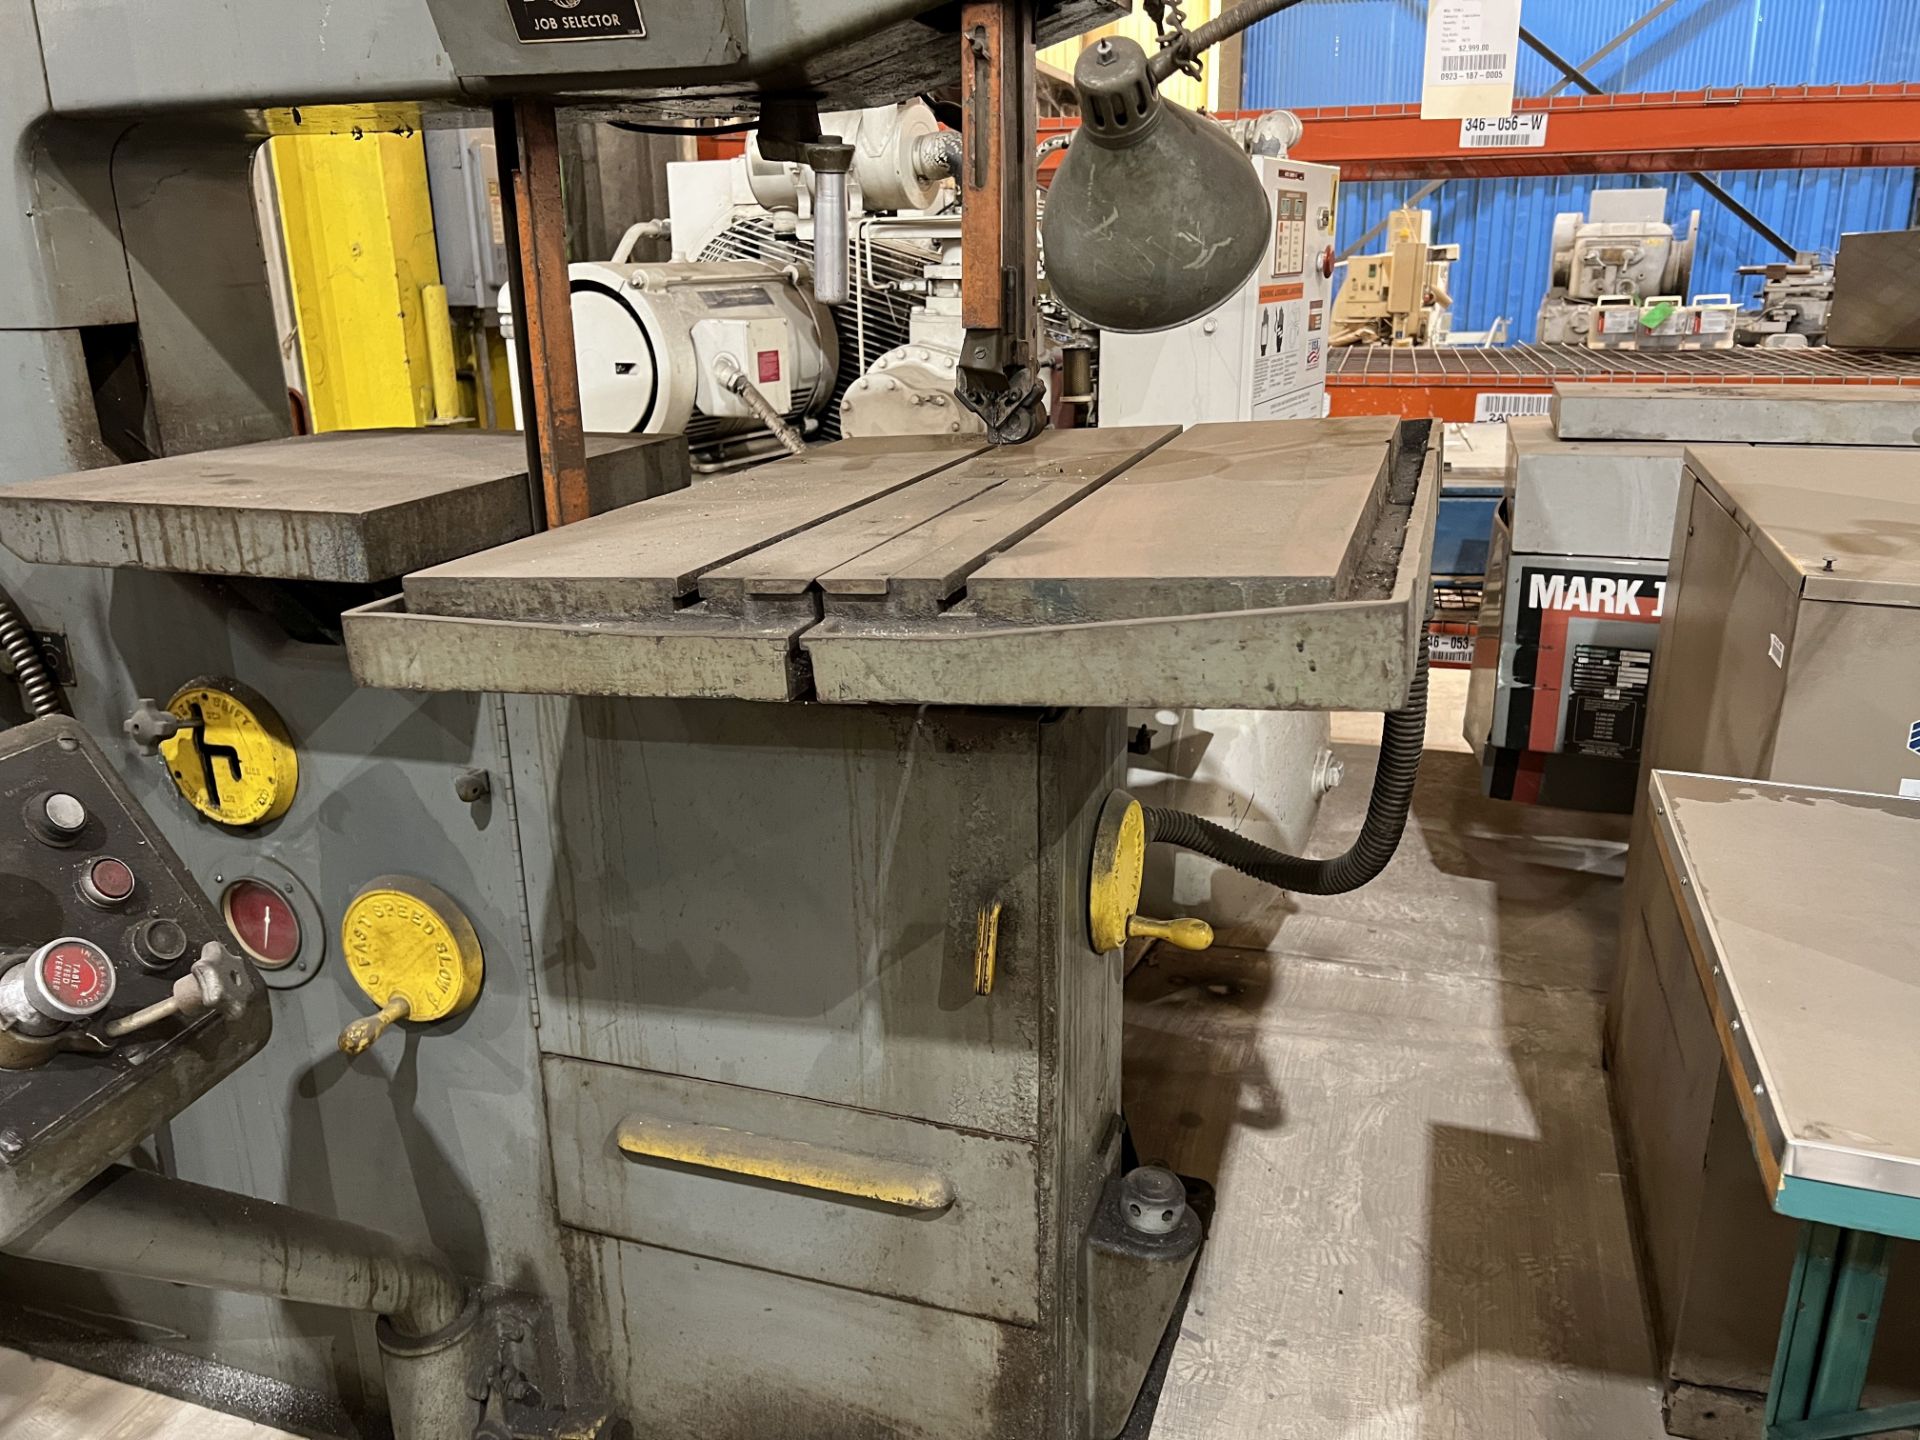 DOALL BANDSAW, Model 3612-3. , Date: n/a; s/n 153-691067, Approx. Capacity: 16", Power: n/a, - Image 28 of 29